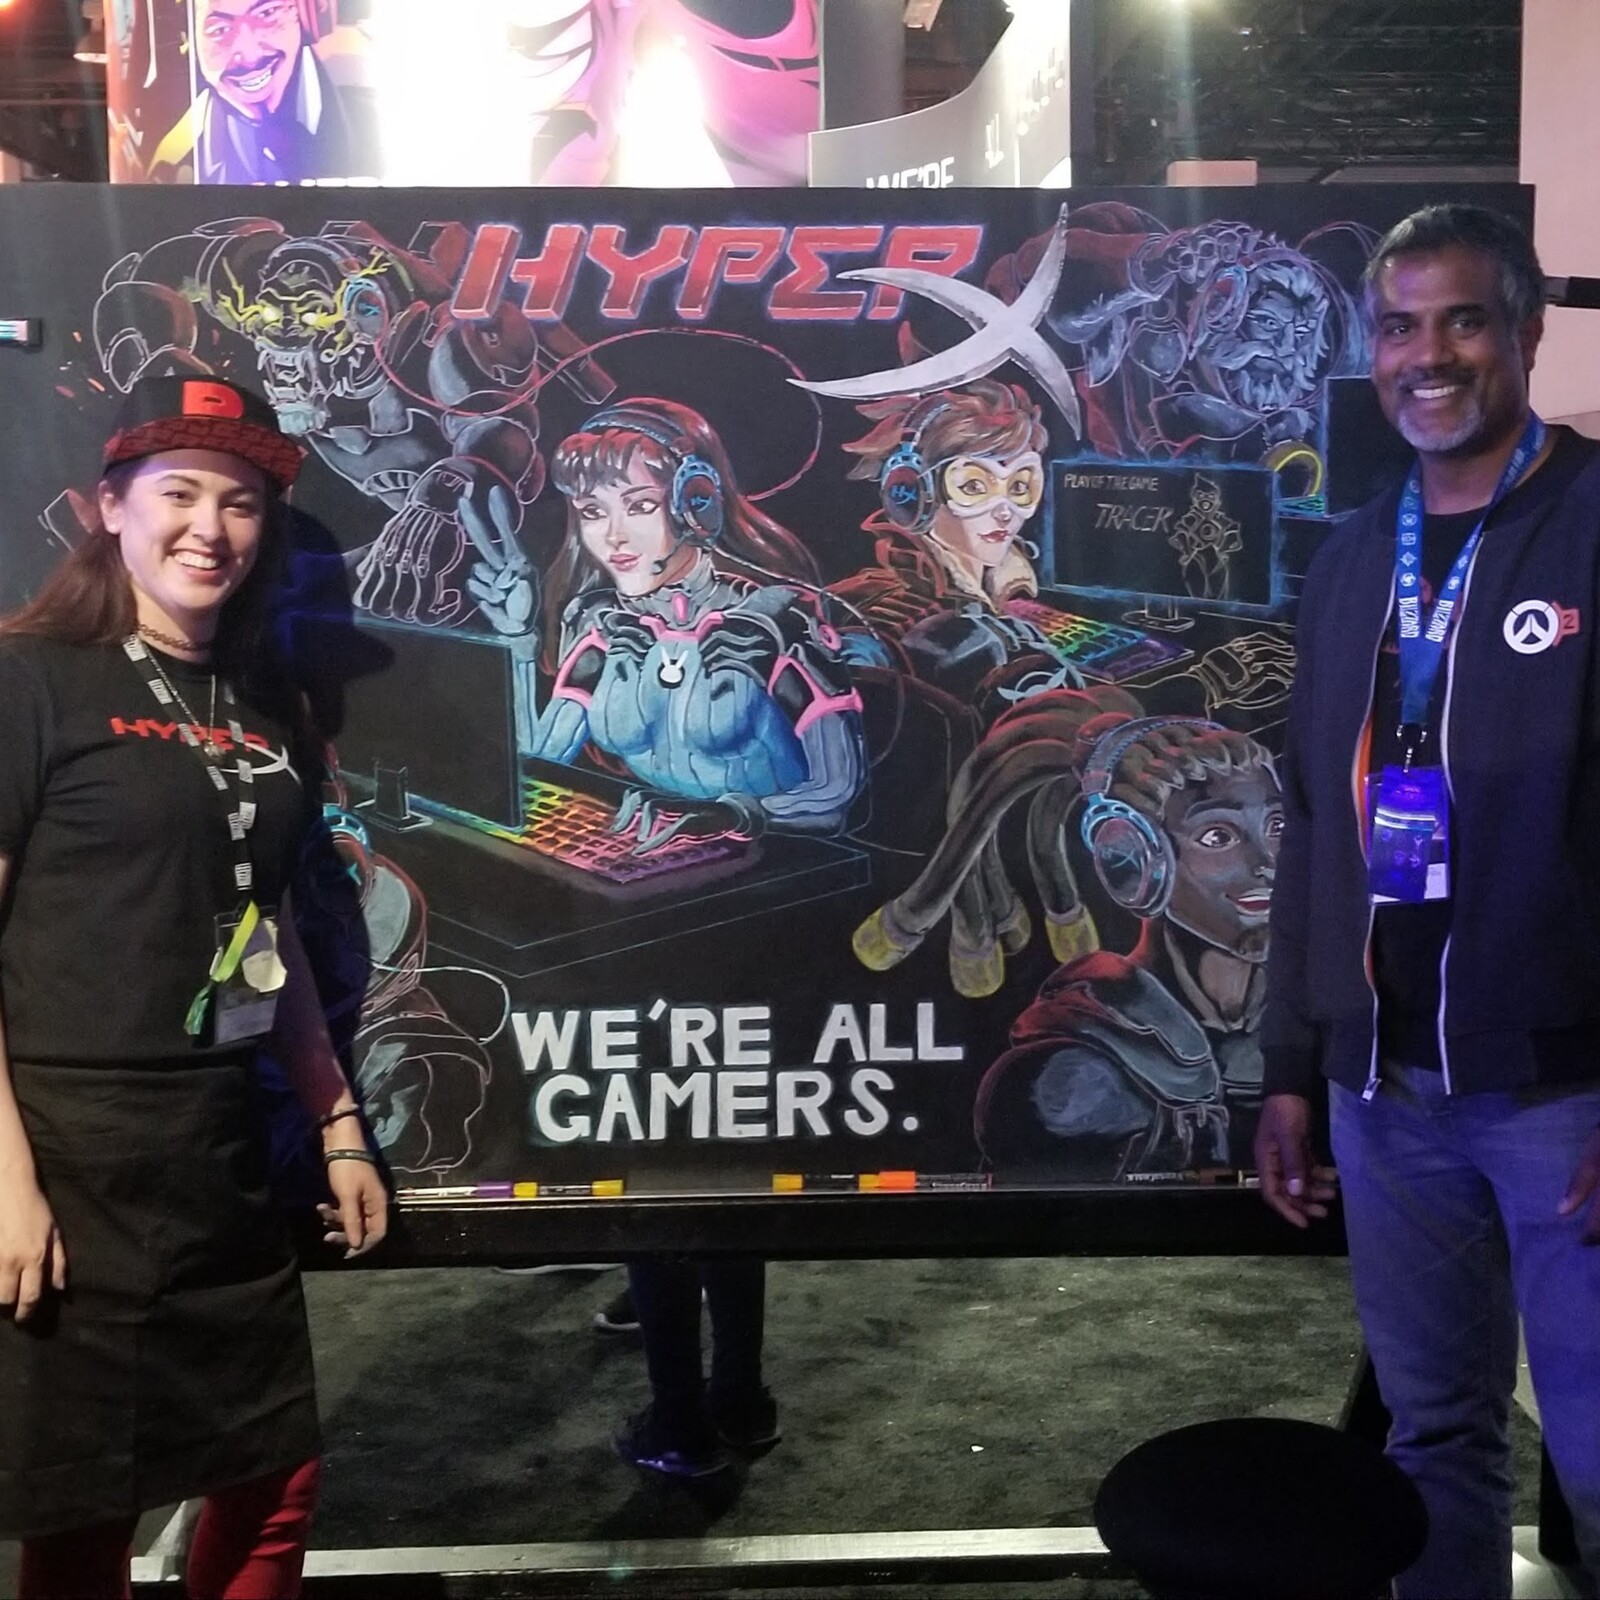 Thank you everyone who stopped to talk to me and take pics! Thank you so much HyperX for working with me! Thank you Blizz employees and fans for being the best people!